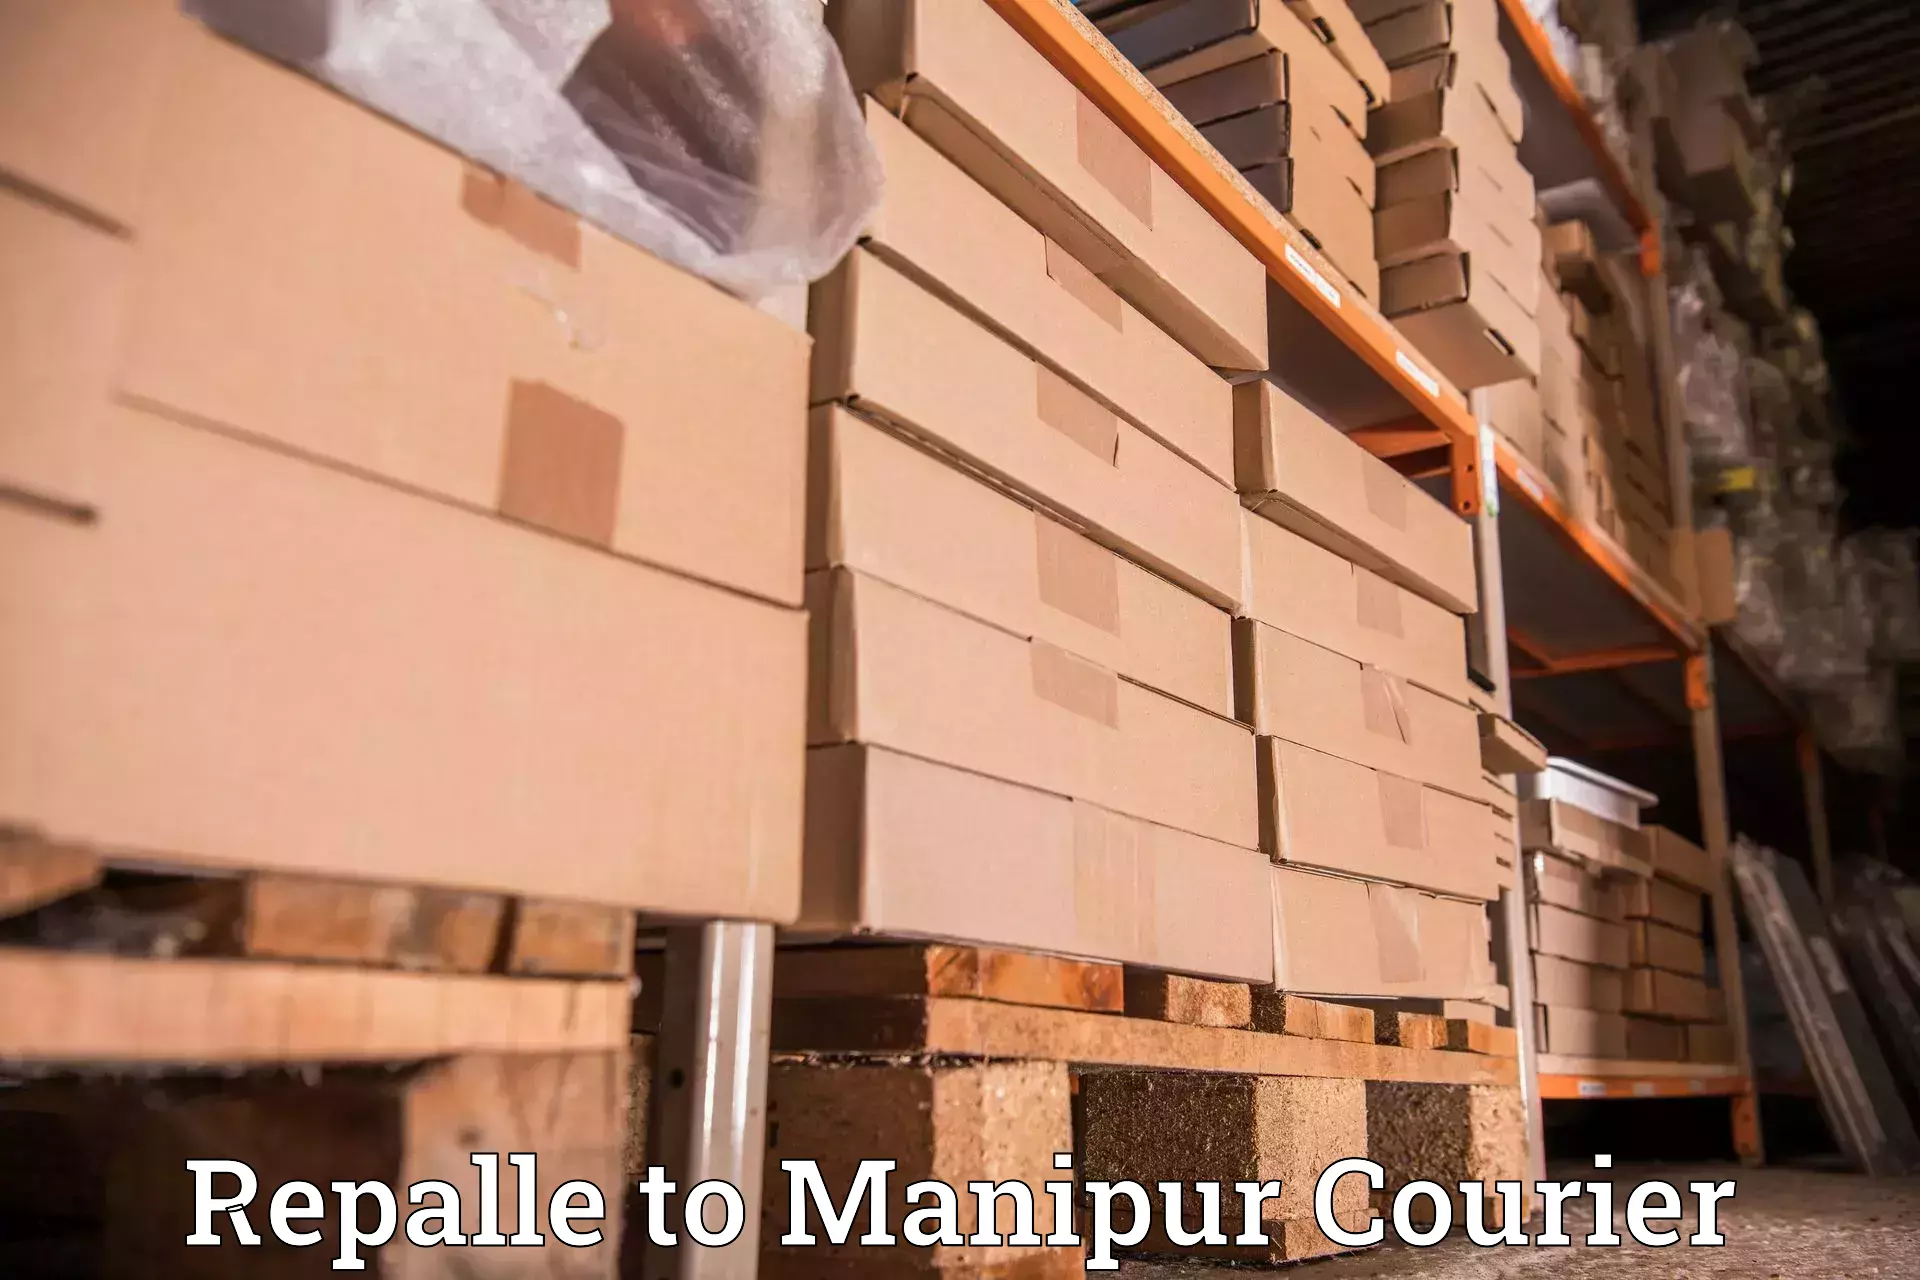 Business delivery service Repalle to Manipur